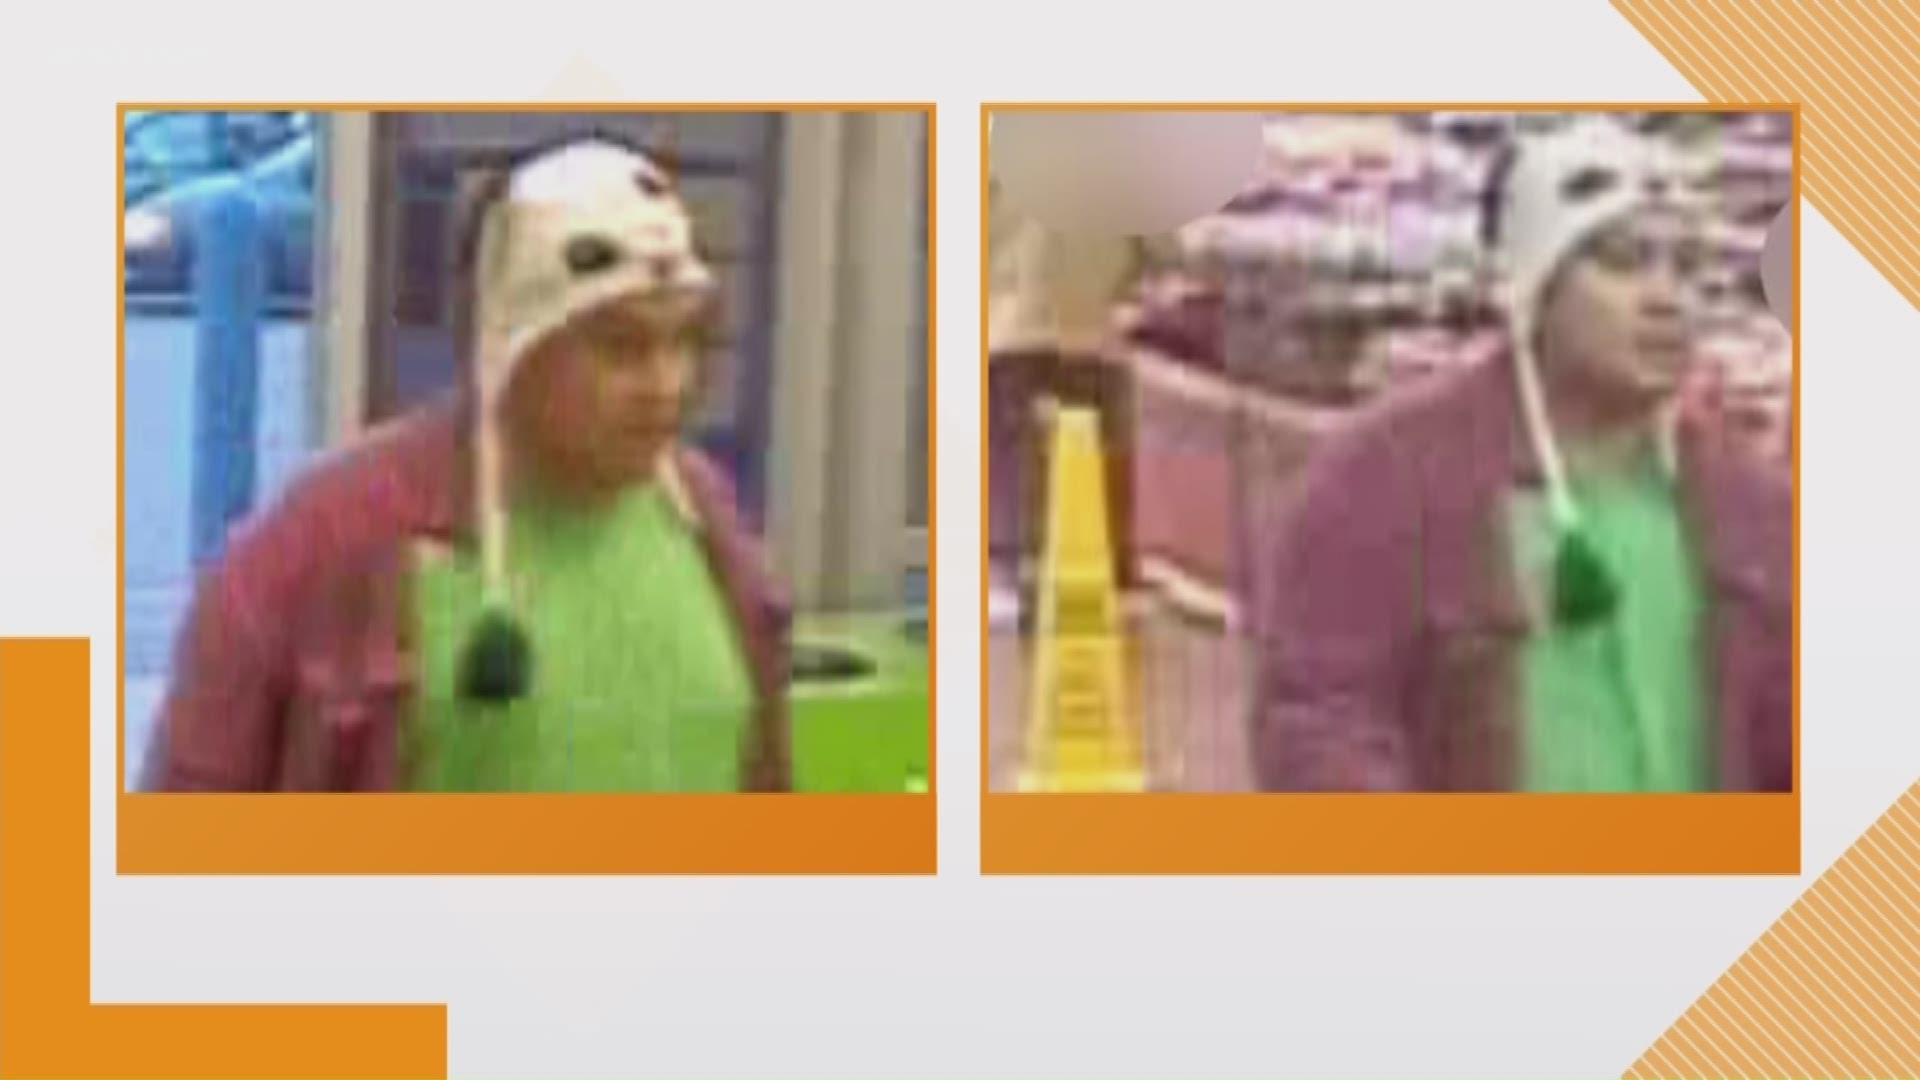 Seguin PD say the man stole $160 worth of detergent from Walmart on two separate occasions